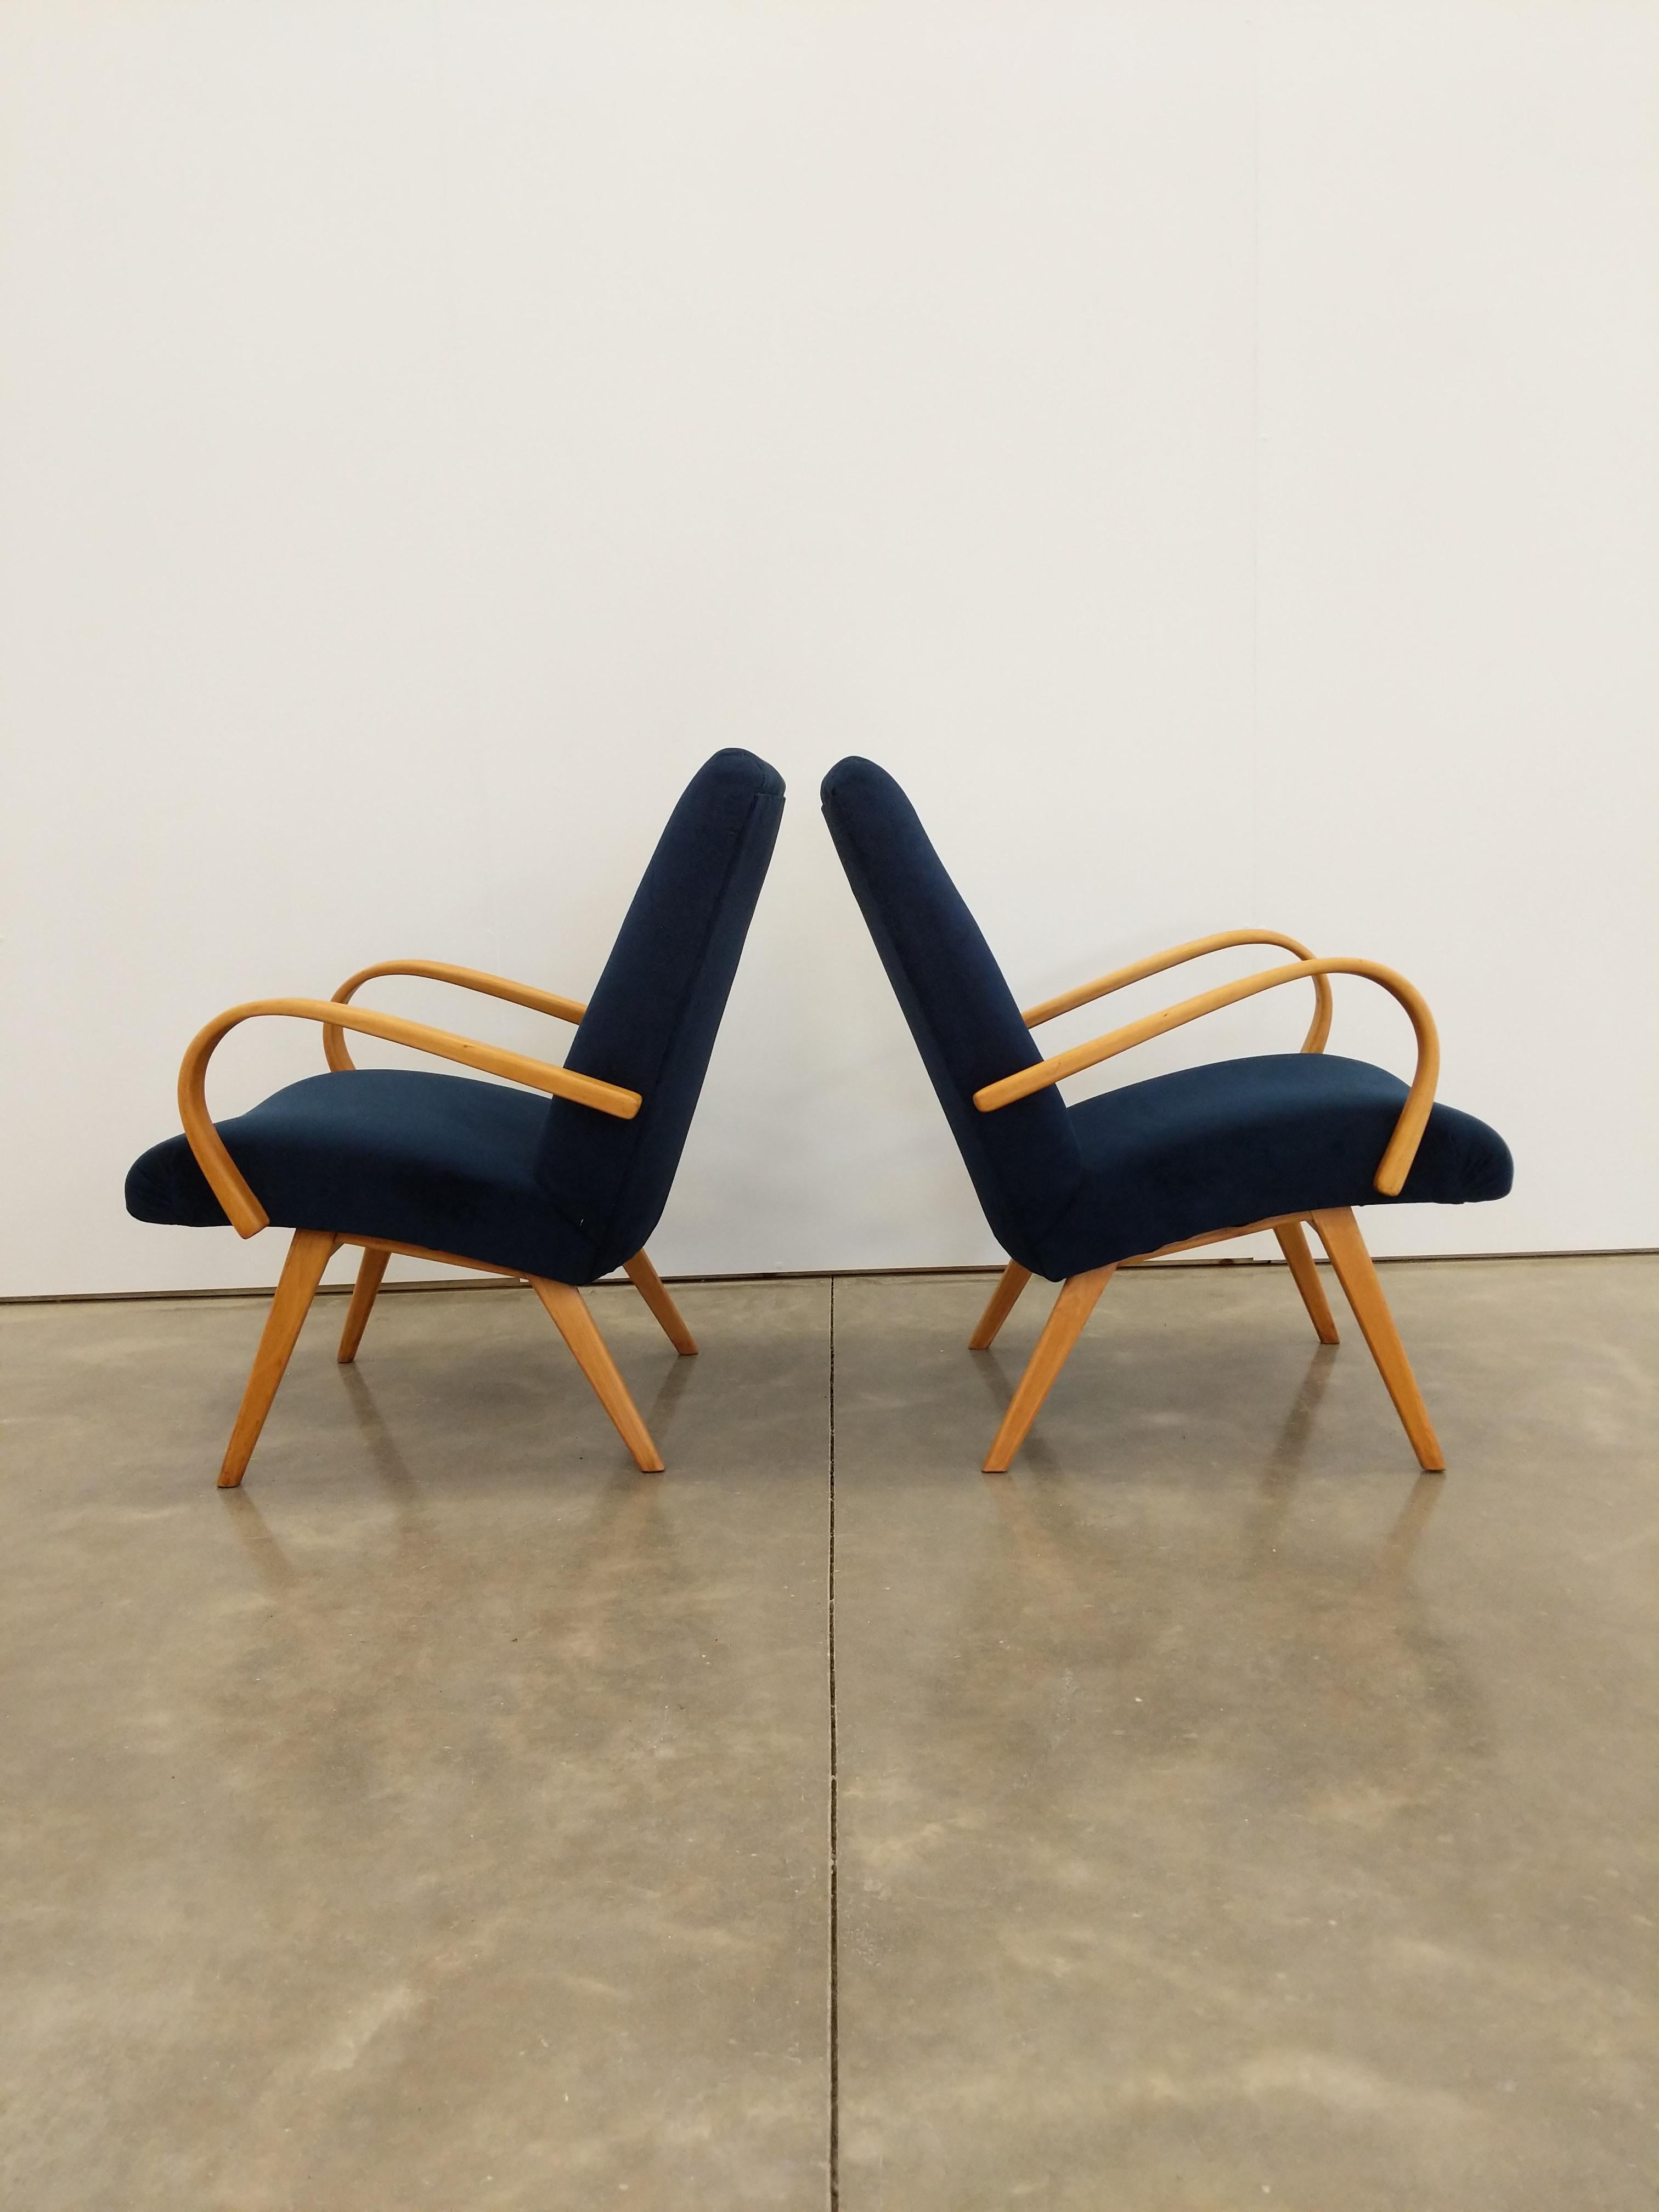 Pair of Vintage Czech Mid Century Modern Lounge Chairs In Good Condition For Sale In Gardiner, NY